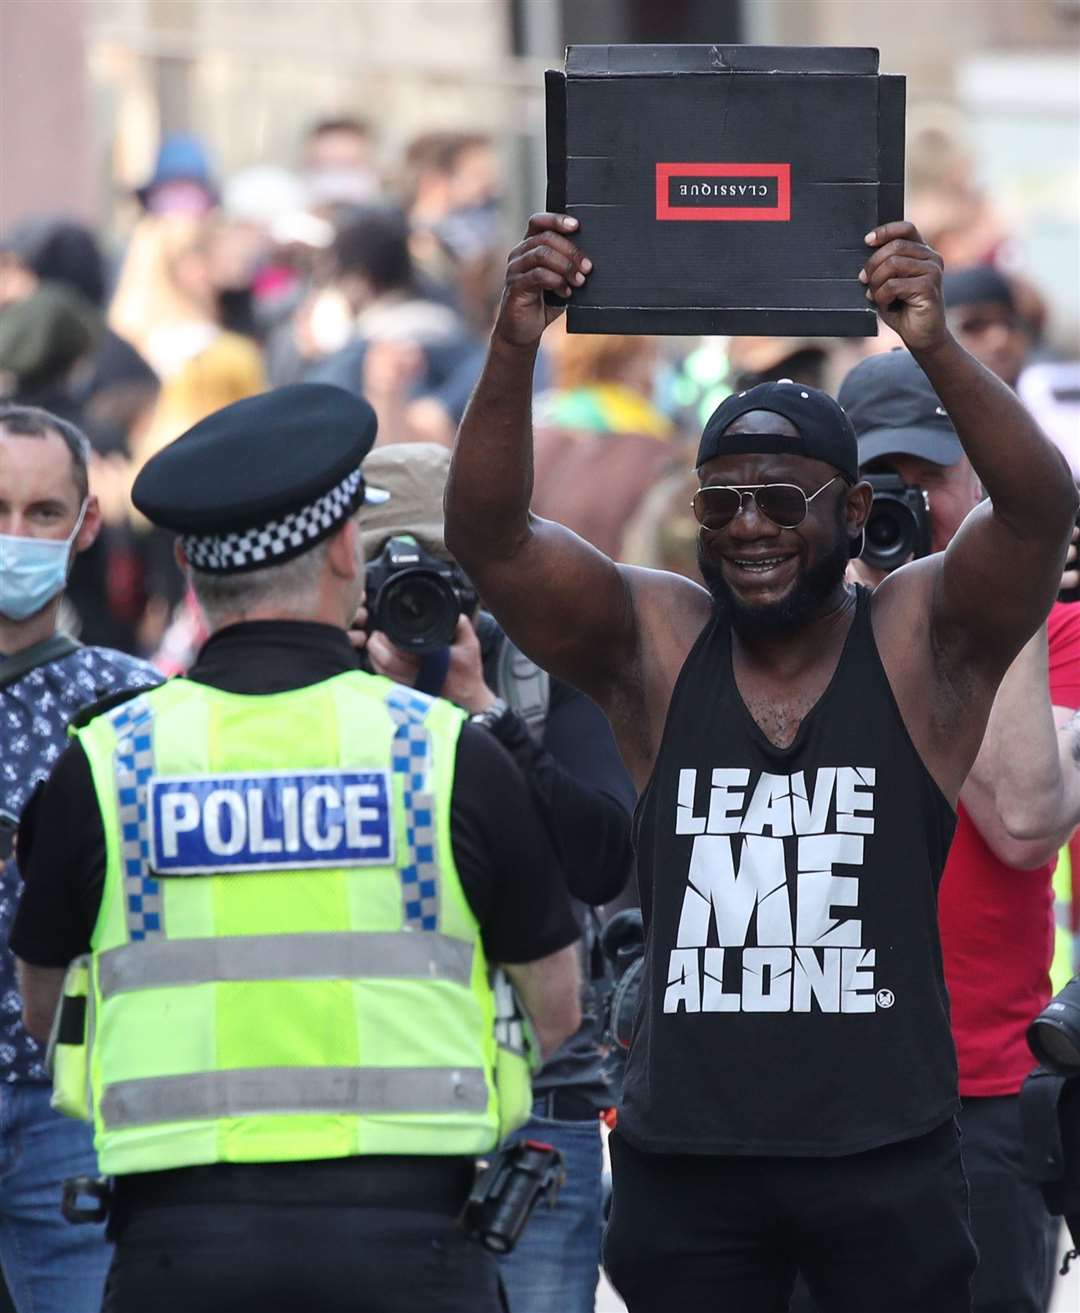 Police and a protester at a Black Lives Matter demonstration in London (Danny Lawson/PA)